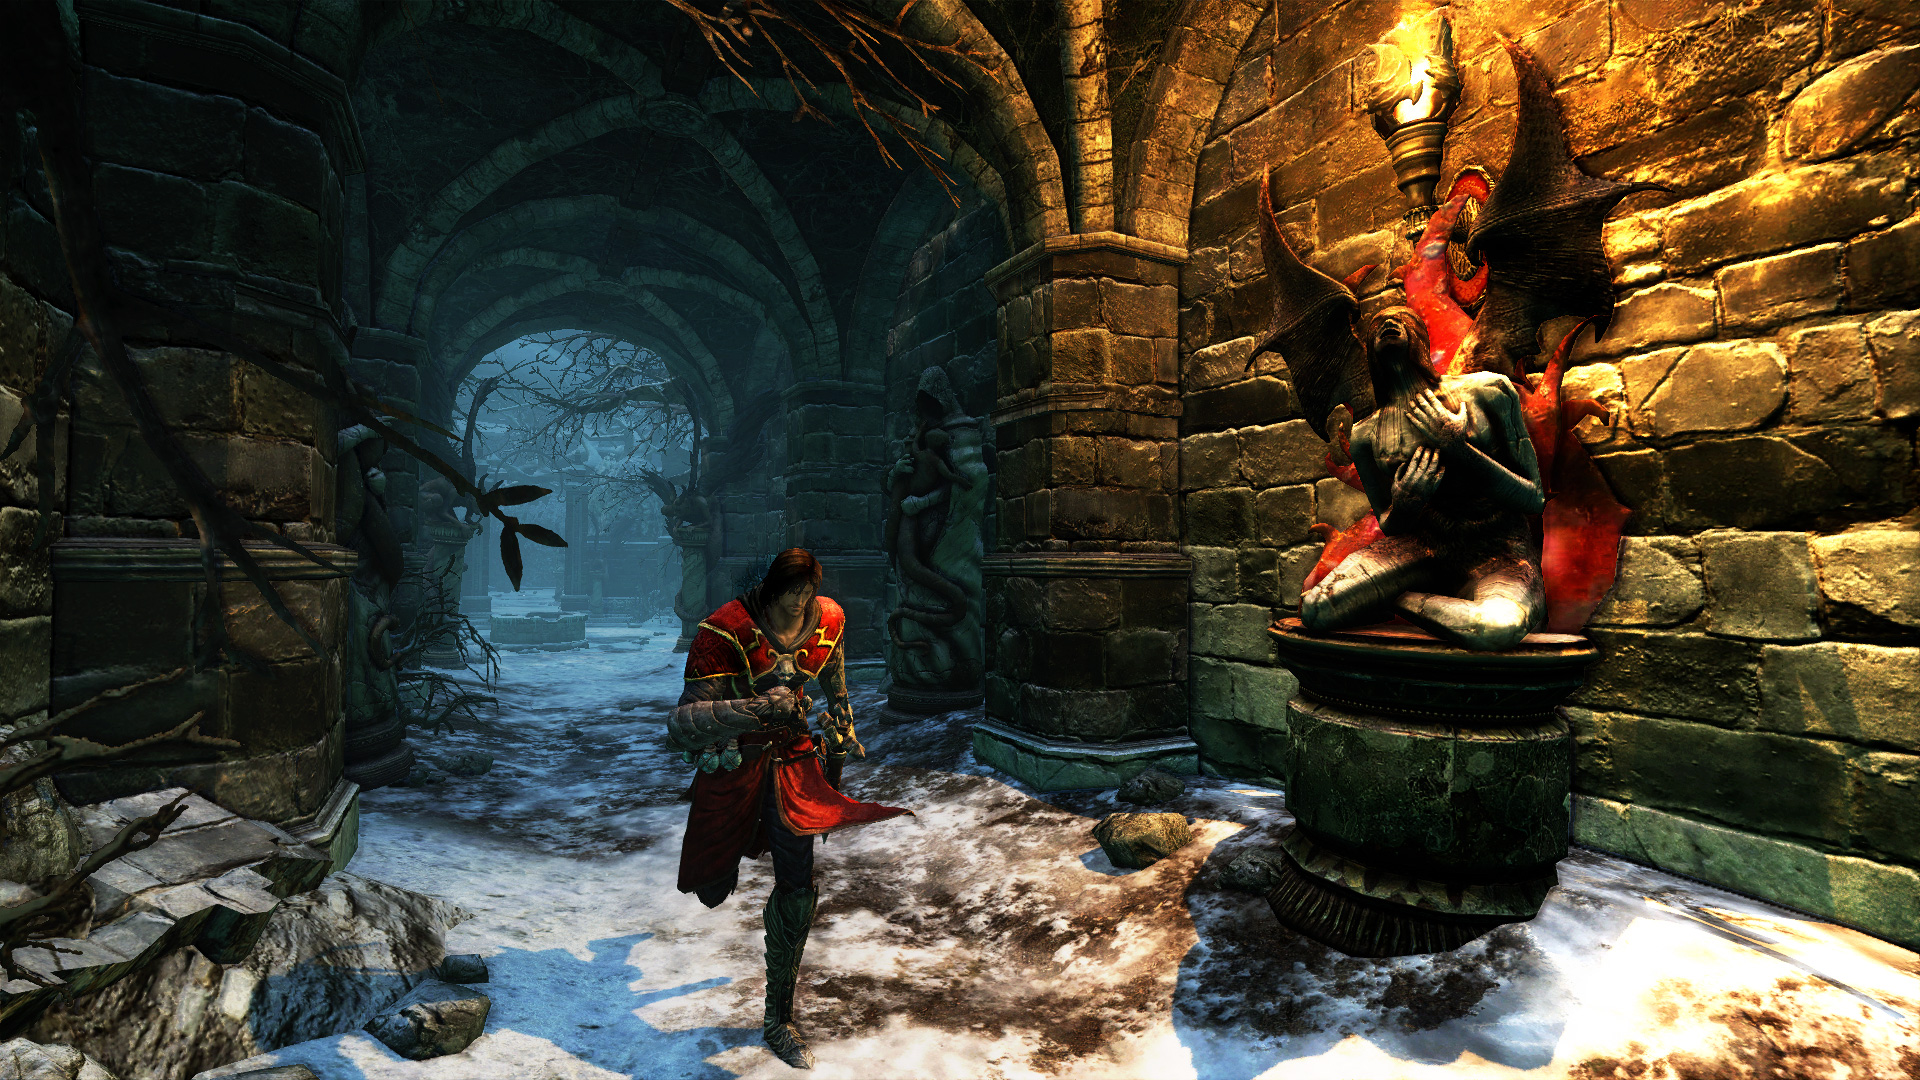 Castlevania: Lords of Shadow – Ultimate Edition Review – Castlevania's  Jelly Beans – Gao Li Occasionally Reviews